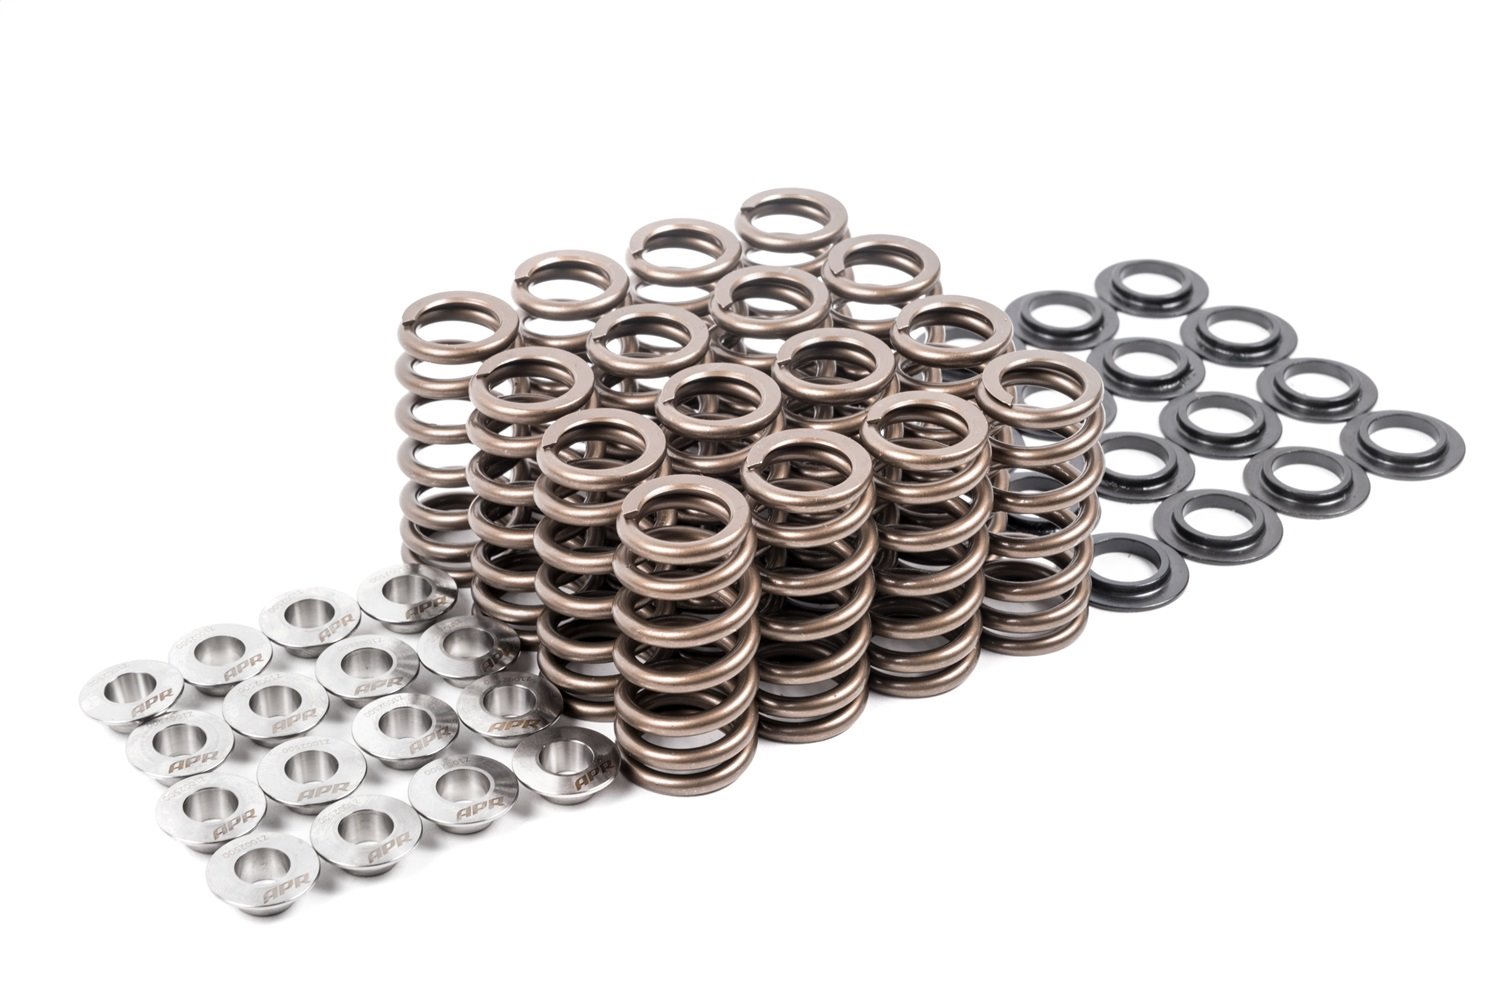 Valve Springs/Seats/Retainers - Set of 16